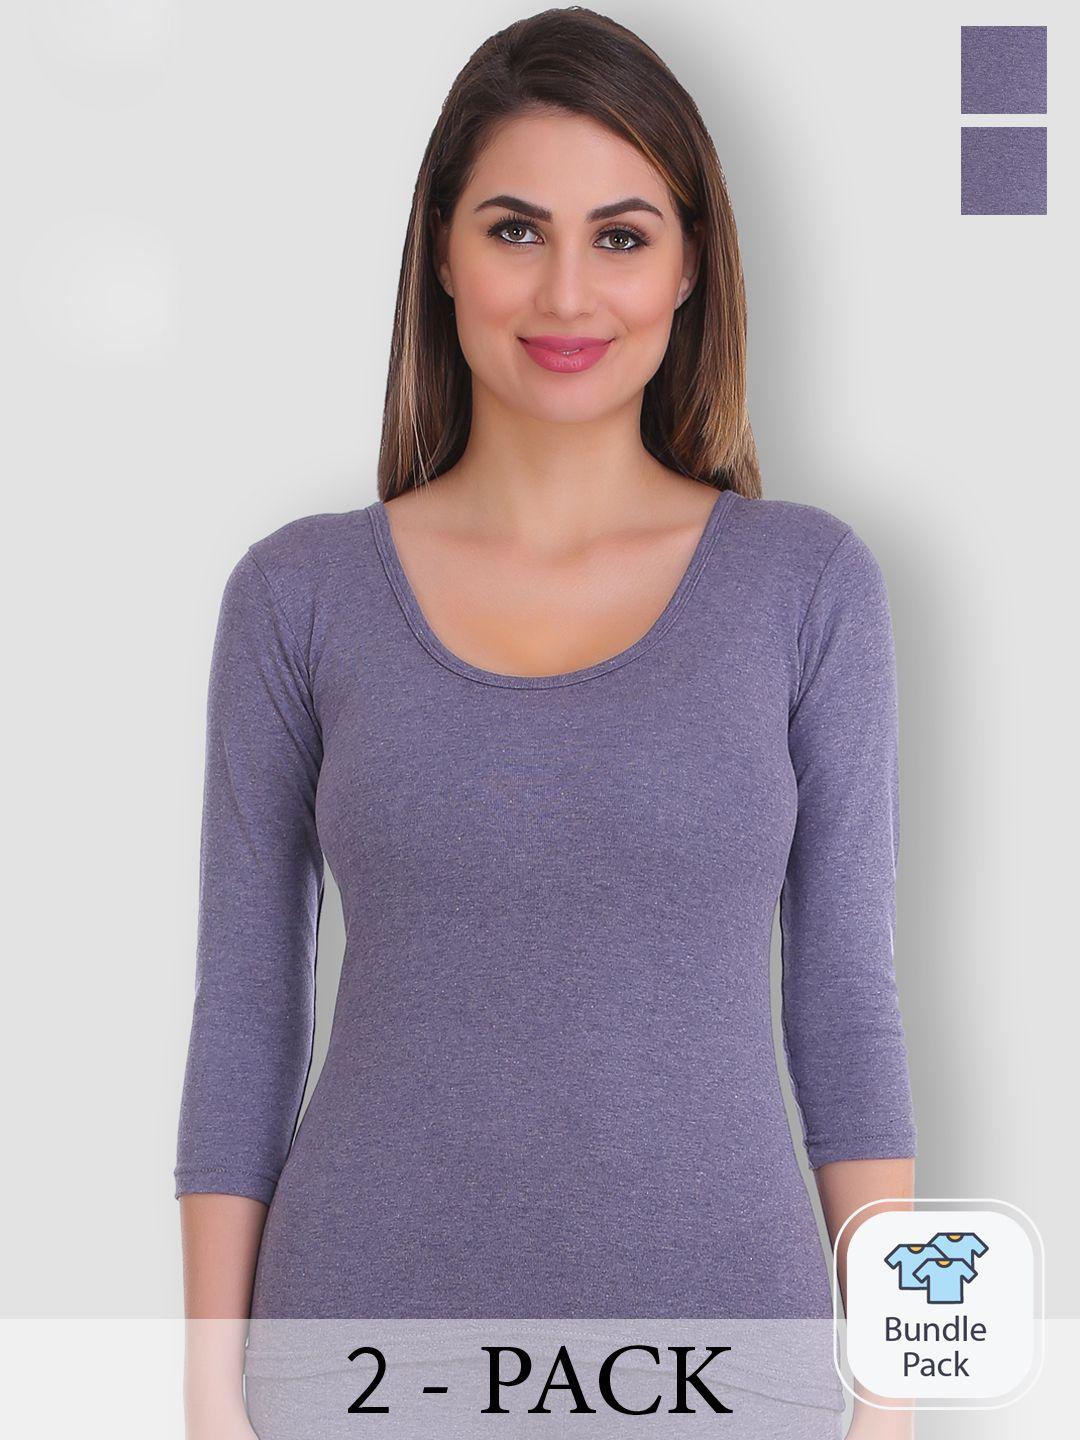 selfcare pack of 2 round neck thermal tops